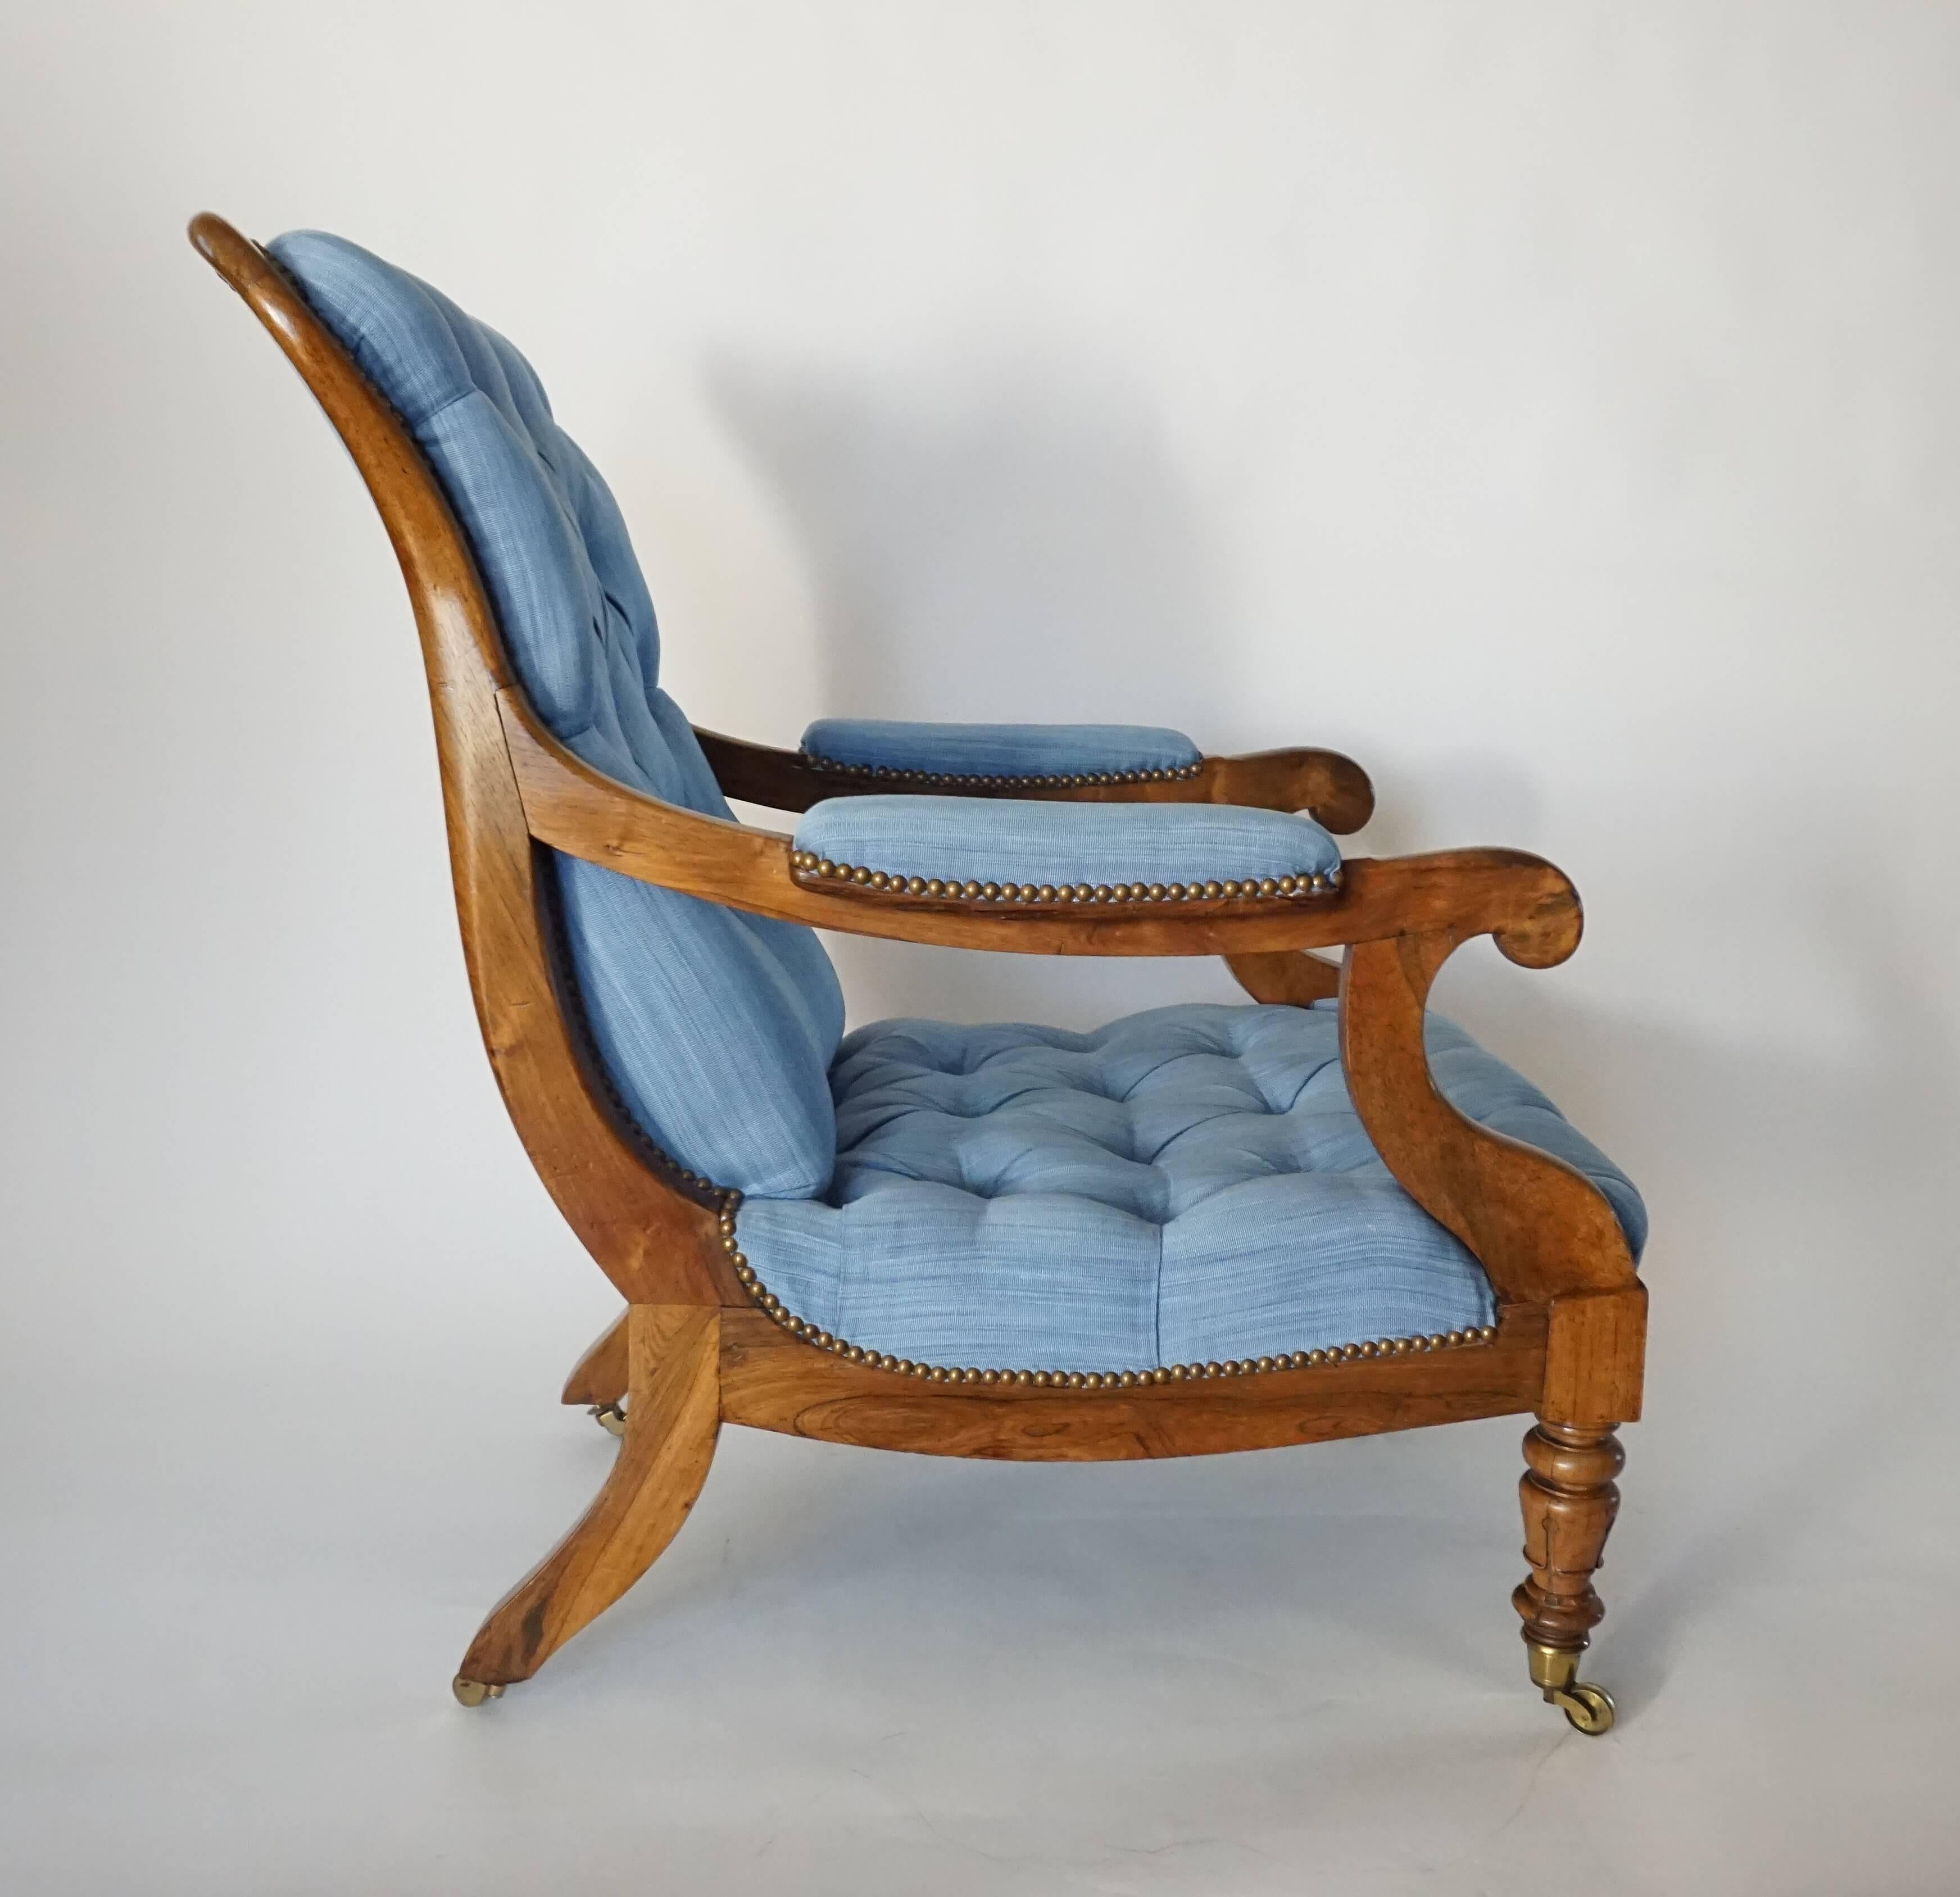 English circa 1840 late Regency style William IV / early Victorian period library or lounge chair of large size having tufted upholstery on solid carved walnut frame with serpentine crest-rail continuing into padded scrolled arms connecting turned